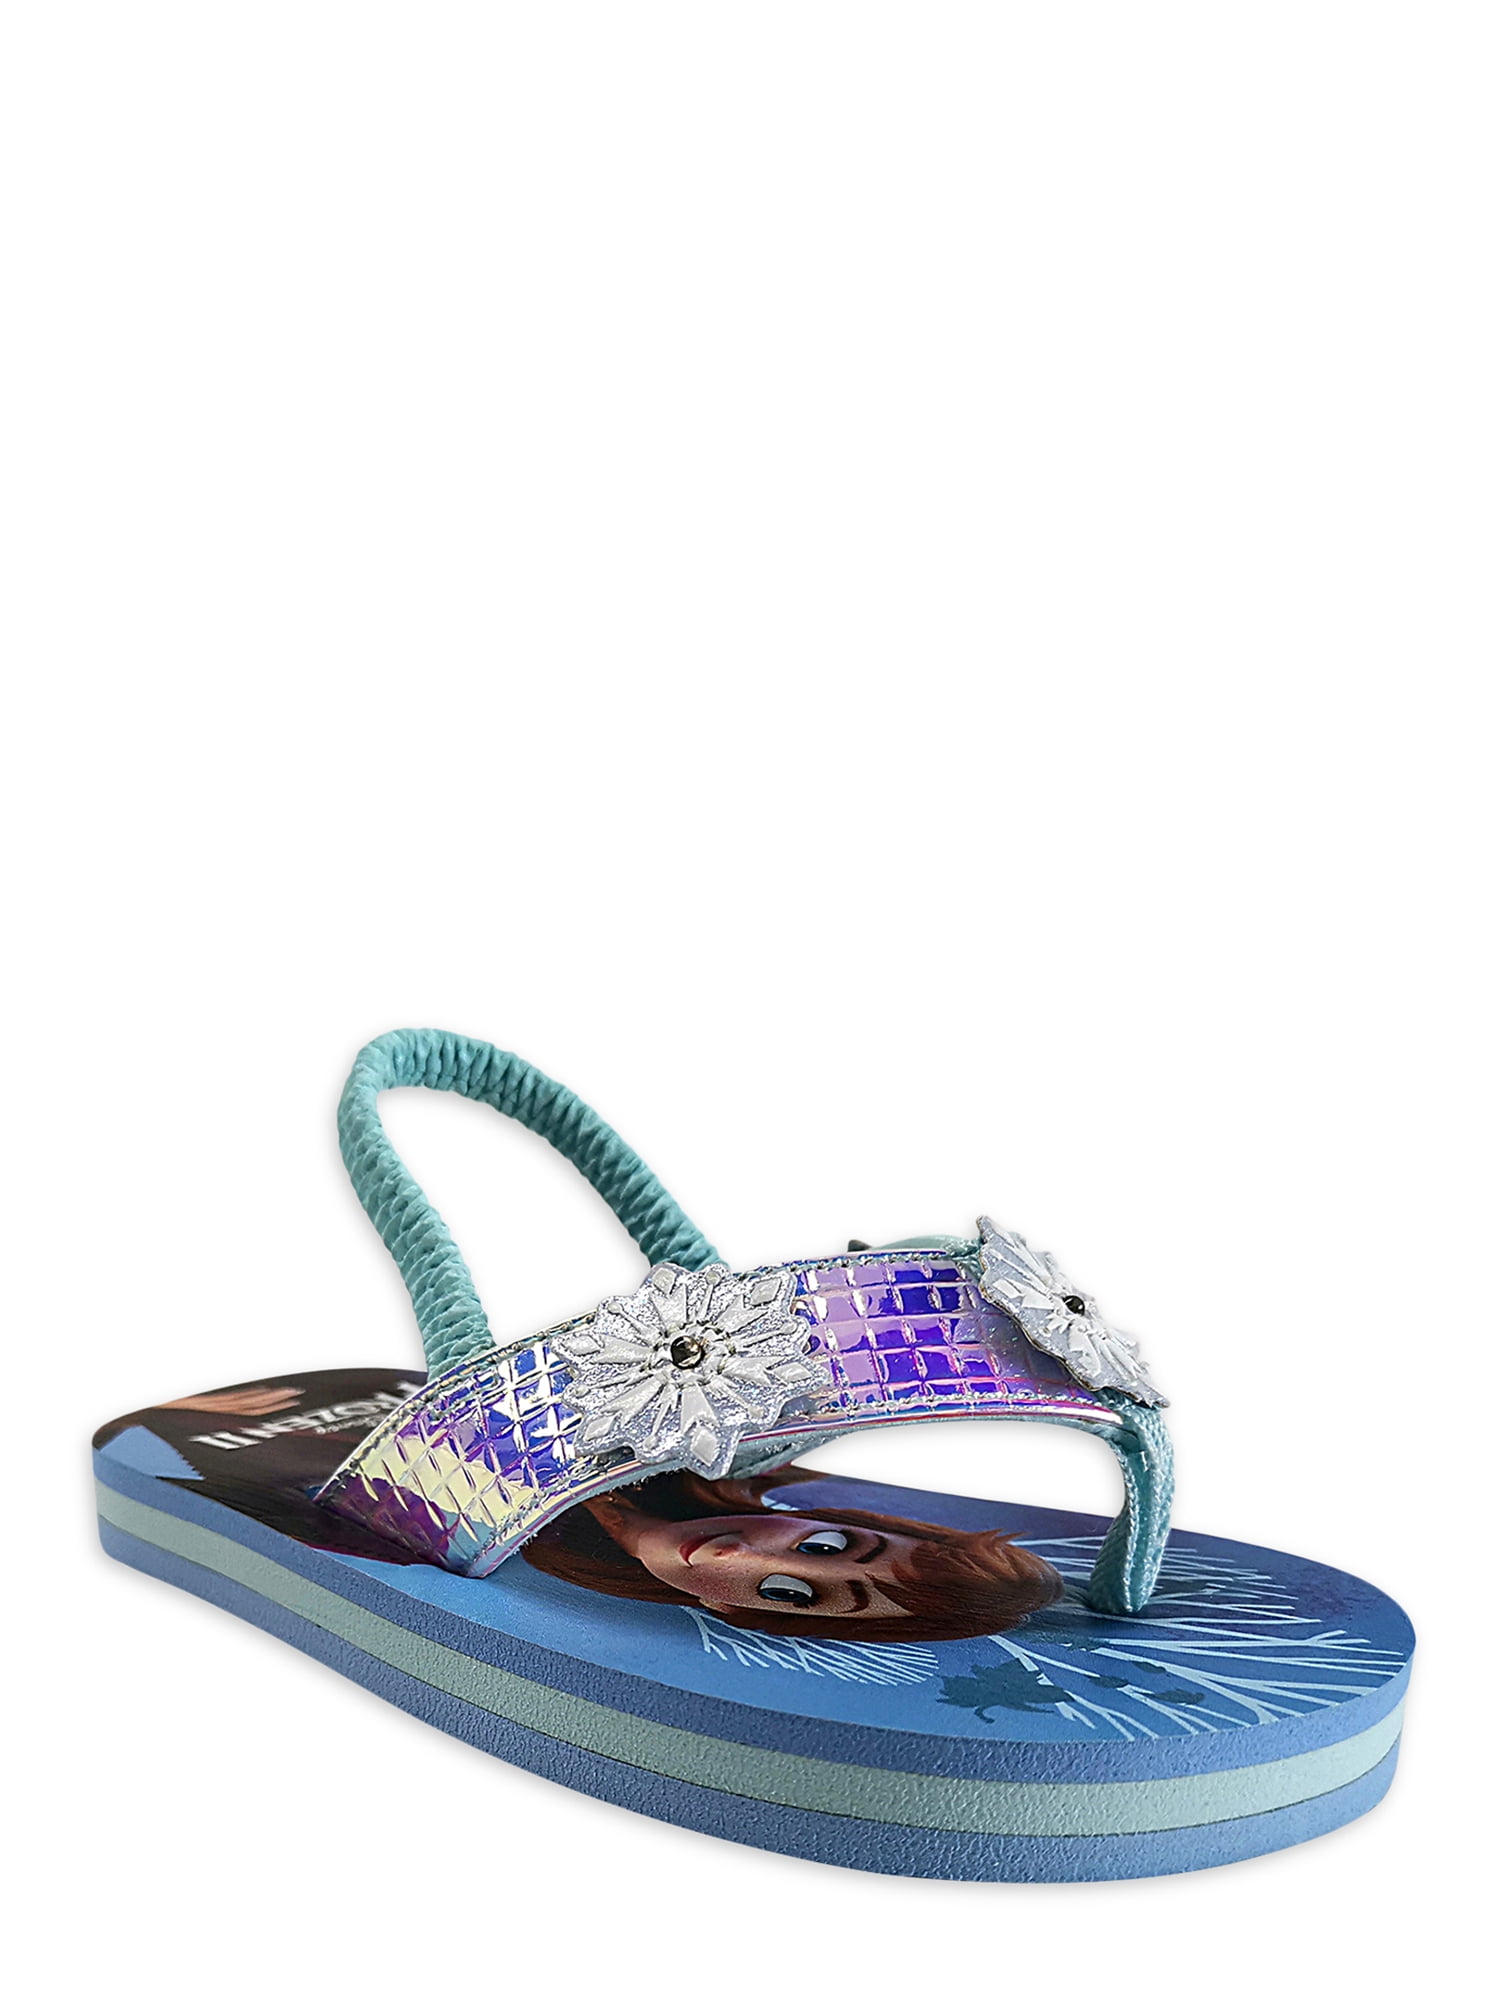 Original Product with Official Licensed Girls Flip Flop Slippers Beach Pool Disney Frozen 2